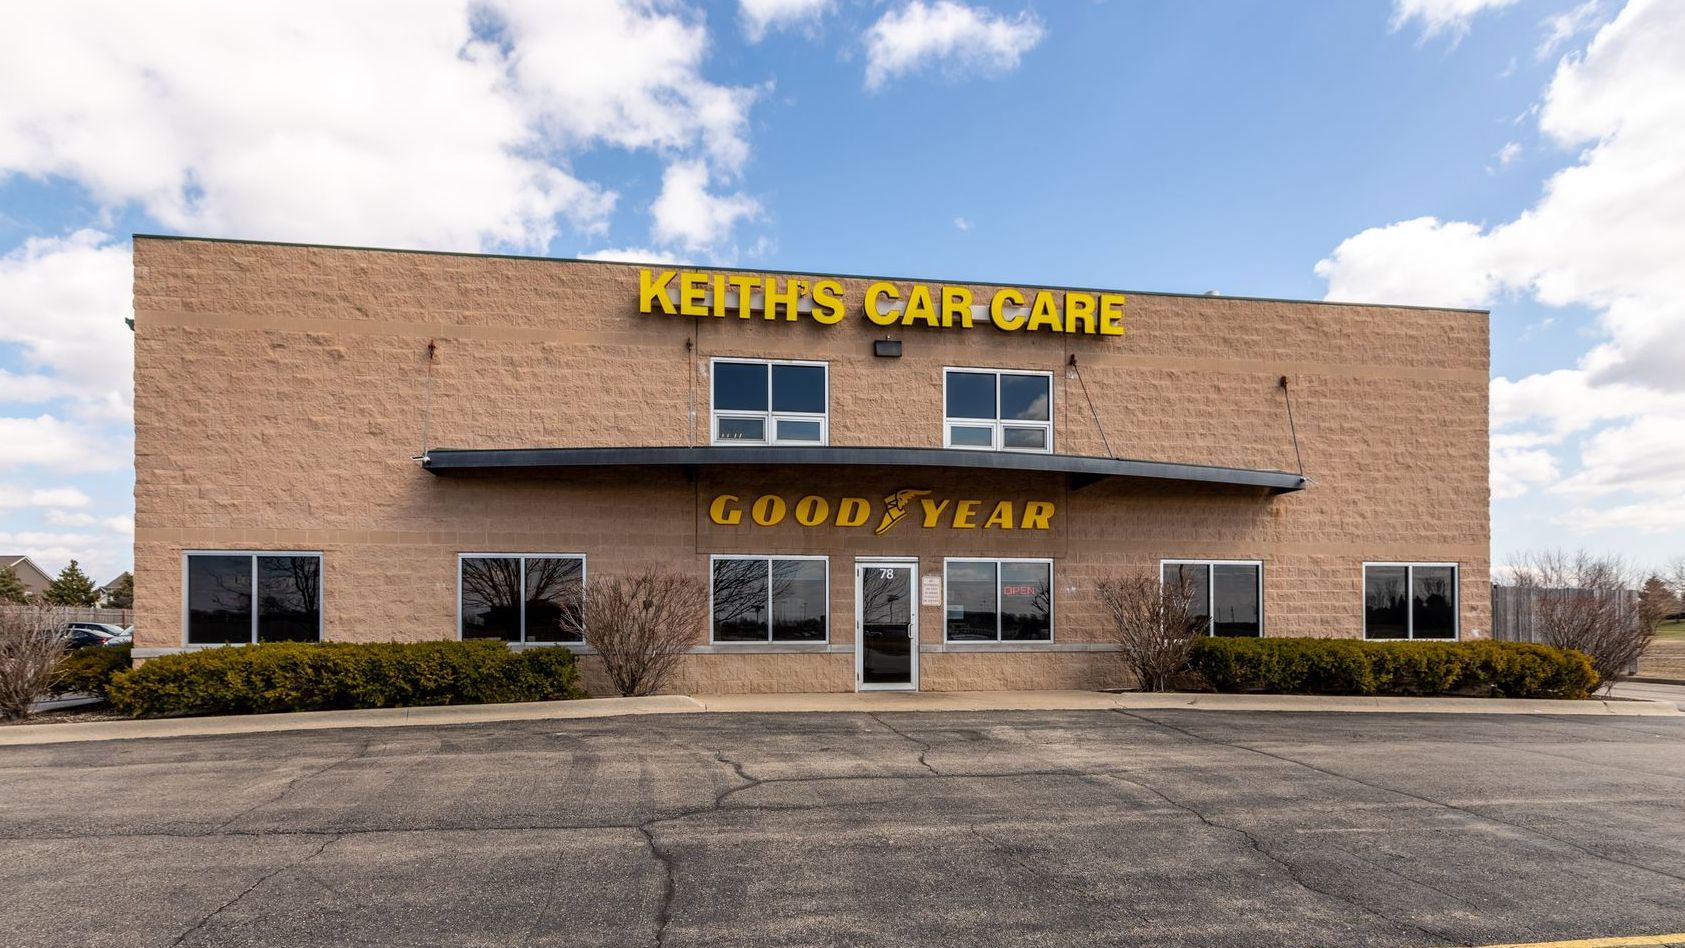 Keith's Car Care in Oswego, IL exterior